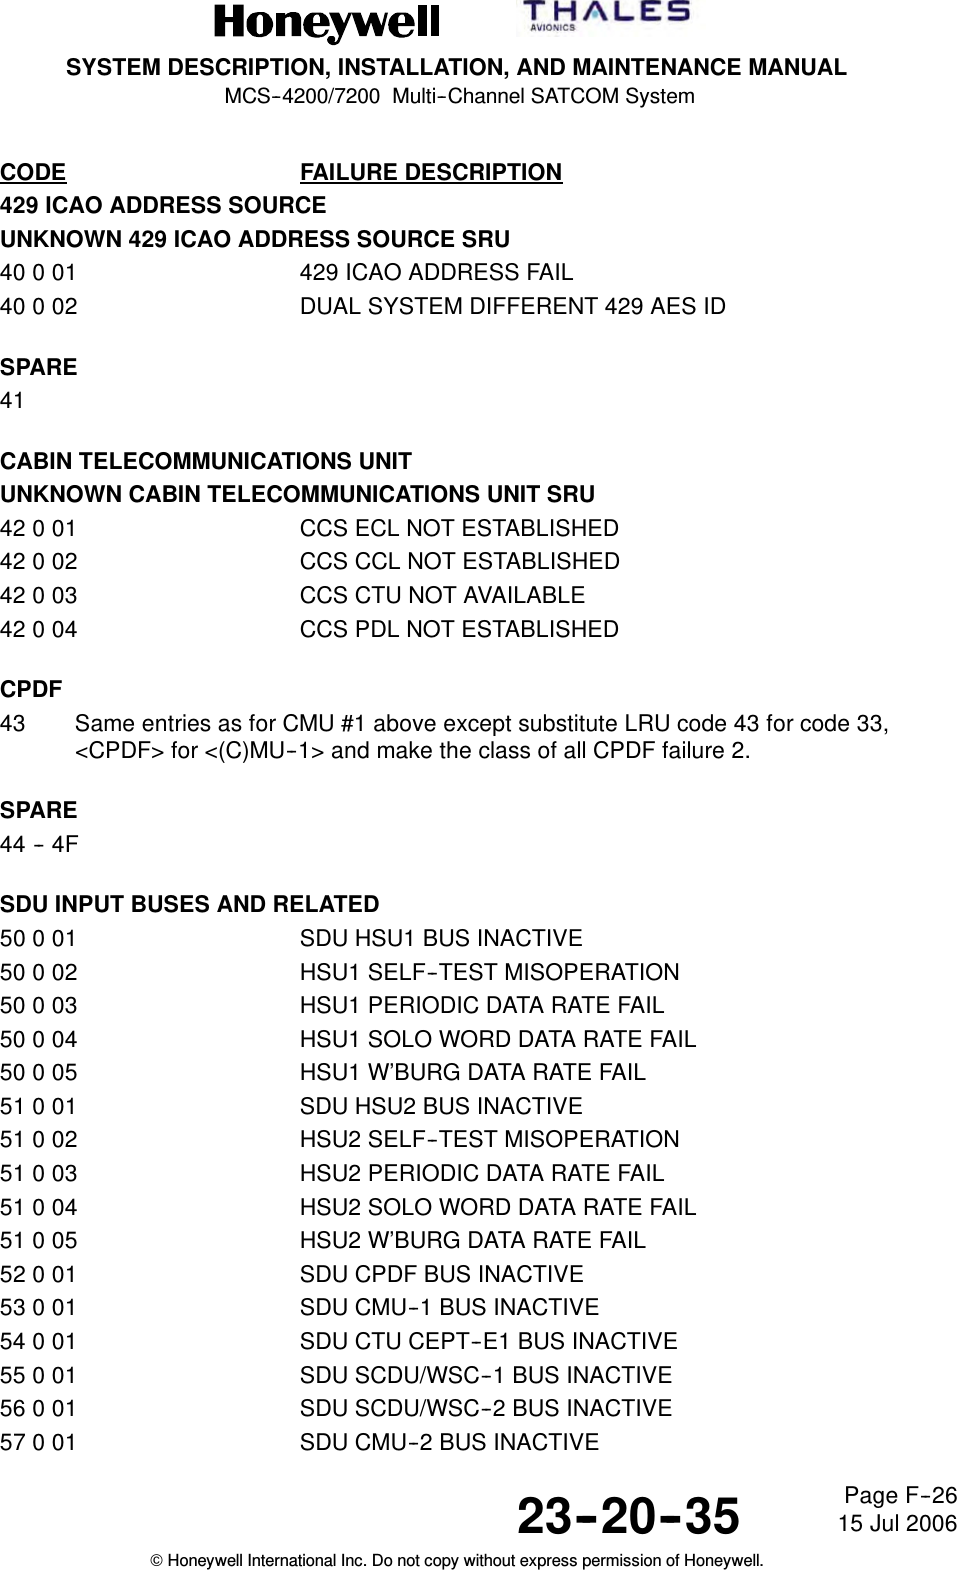 SYSTEM DESCRIPTION, INSTALLATION, AND MAINTENANCE MANUALMCS--4200/7200 Multi--Channel SATCOM System23--20--35 15 Jul 2006Honeywell International Inc. Do not copy without express permission of Honeywell.Page F--26CODE FAILURE DESCRIPTION429 ICAO ADDRESS SOURCEUNKNOWN 429 ICAO ADDRESS SOURCE SRU40 0 01 429 ICAO ADDRESS FAIL40 0 02 DUAL SYSTEM DIFFERENT 429 AES IDSPARE41CABIN TELECOMMUNICATIONS UNITUNKNOWN CABIN TELECOMMUNICATIONS UNIT SRU42 0 01 CCS ECL NOT ESTABLISHED42 0 02 CCS CCL NOT ESTABLISHED42 0 03 CCS CTU NOT AVAILABLE42 0 04 CCS PDL NOT ESTABLISHEDCPDF43 Same entries as for CMU #1 above except substitute LRU code 43 for code 33,&lt;CPDF&gt; for &lt;(C)MU--1&gt; and make the class of all CPDF failure 2.SPARE44 -- 4FSDU INPUT BUSES AND RELATED50 0 01 SDU HSU1 BUS INACTIVE50 0 02 HSU1 SELF--TEST MISOPERATION50 0 03 HSU1 PERIODIC DATA RATE FAIL50004 HSU1SOLOWORDDATARATEFAIL50 0 05 HSU1 W’BURG DATA RATE FAIL51 0 01 SDU HSU2 BUS INACTIVE51 0 02 HSU2 SELF--TEST MISOPERATION51 0 03 HSU2 PERIODIC DATA RATE FAIL51004 HSU2SOLOWORDDATARATEFAIL51 0 05 HSU2 W’BURG DATA RATE FAIL52 0 01 SDU CPDF BUS INACTIVE53 0 01 SDU CMU--1 BUS INACTIVE54 0 01 SDU CTU CEPT--E1 BUS INACTIVE55 0 01 SDU SCDU/WSC--1 BUS INACTIVE56 0 01 SDU SCDU/WSC--2 BUS INACTIVE57 0 01 SDU CMU--2 BUS INACTIVE